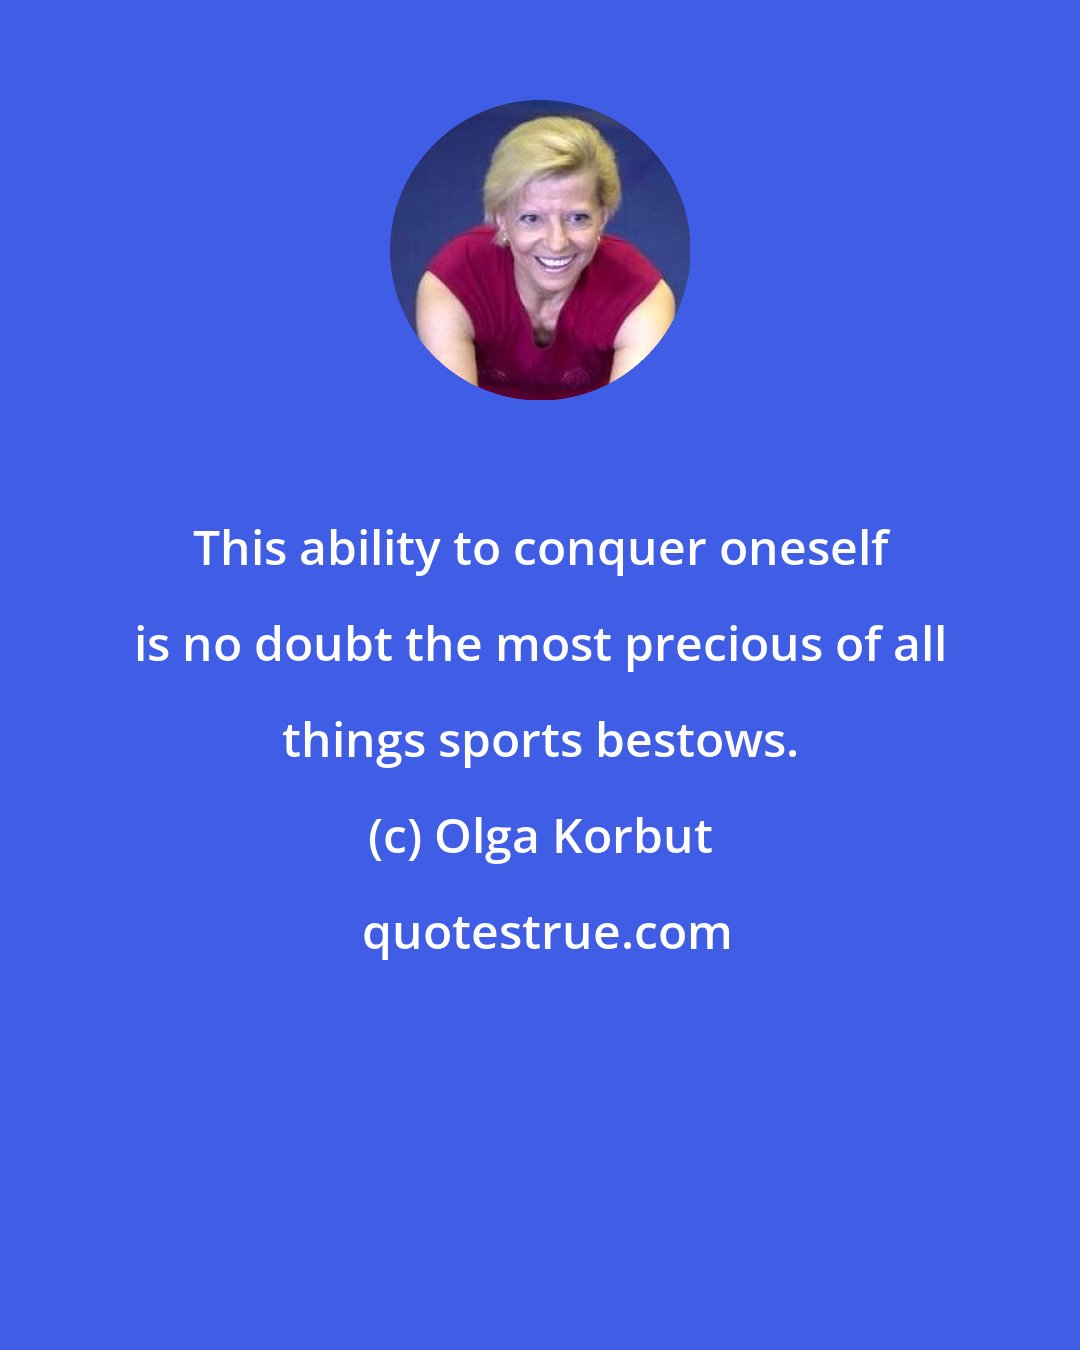 Olga Korbut: This ability to conquer oneself is no doubt the most precious of all things sports bestows.